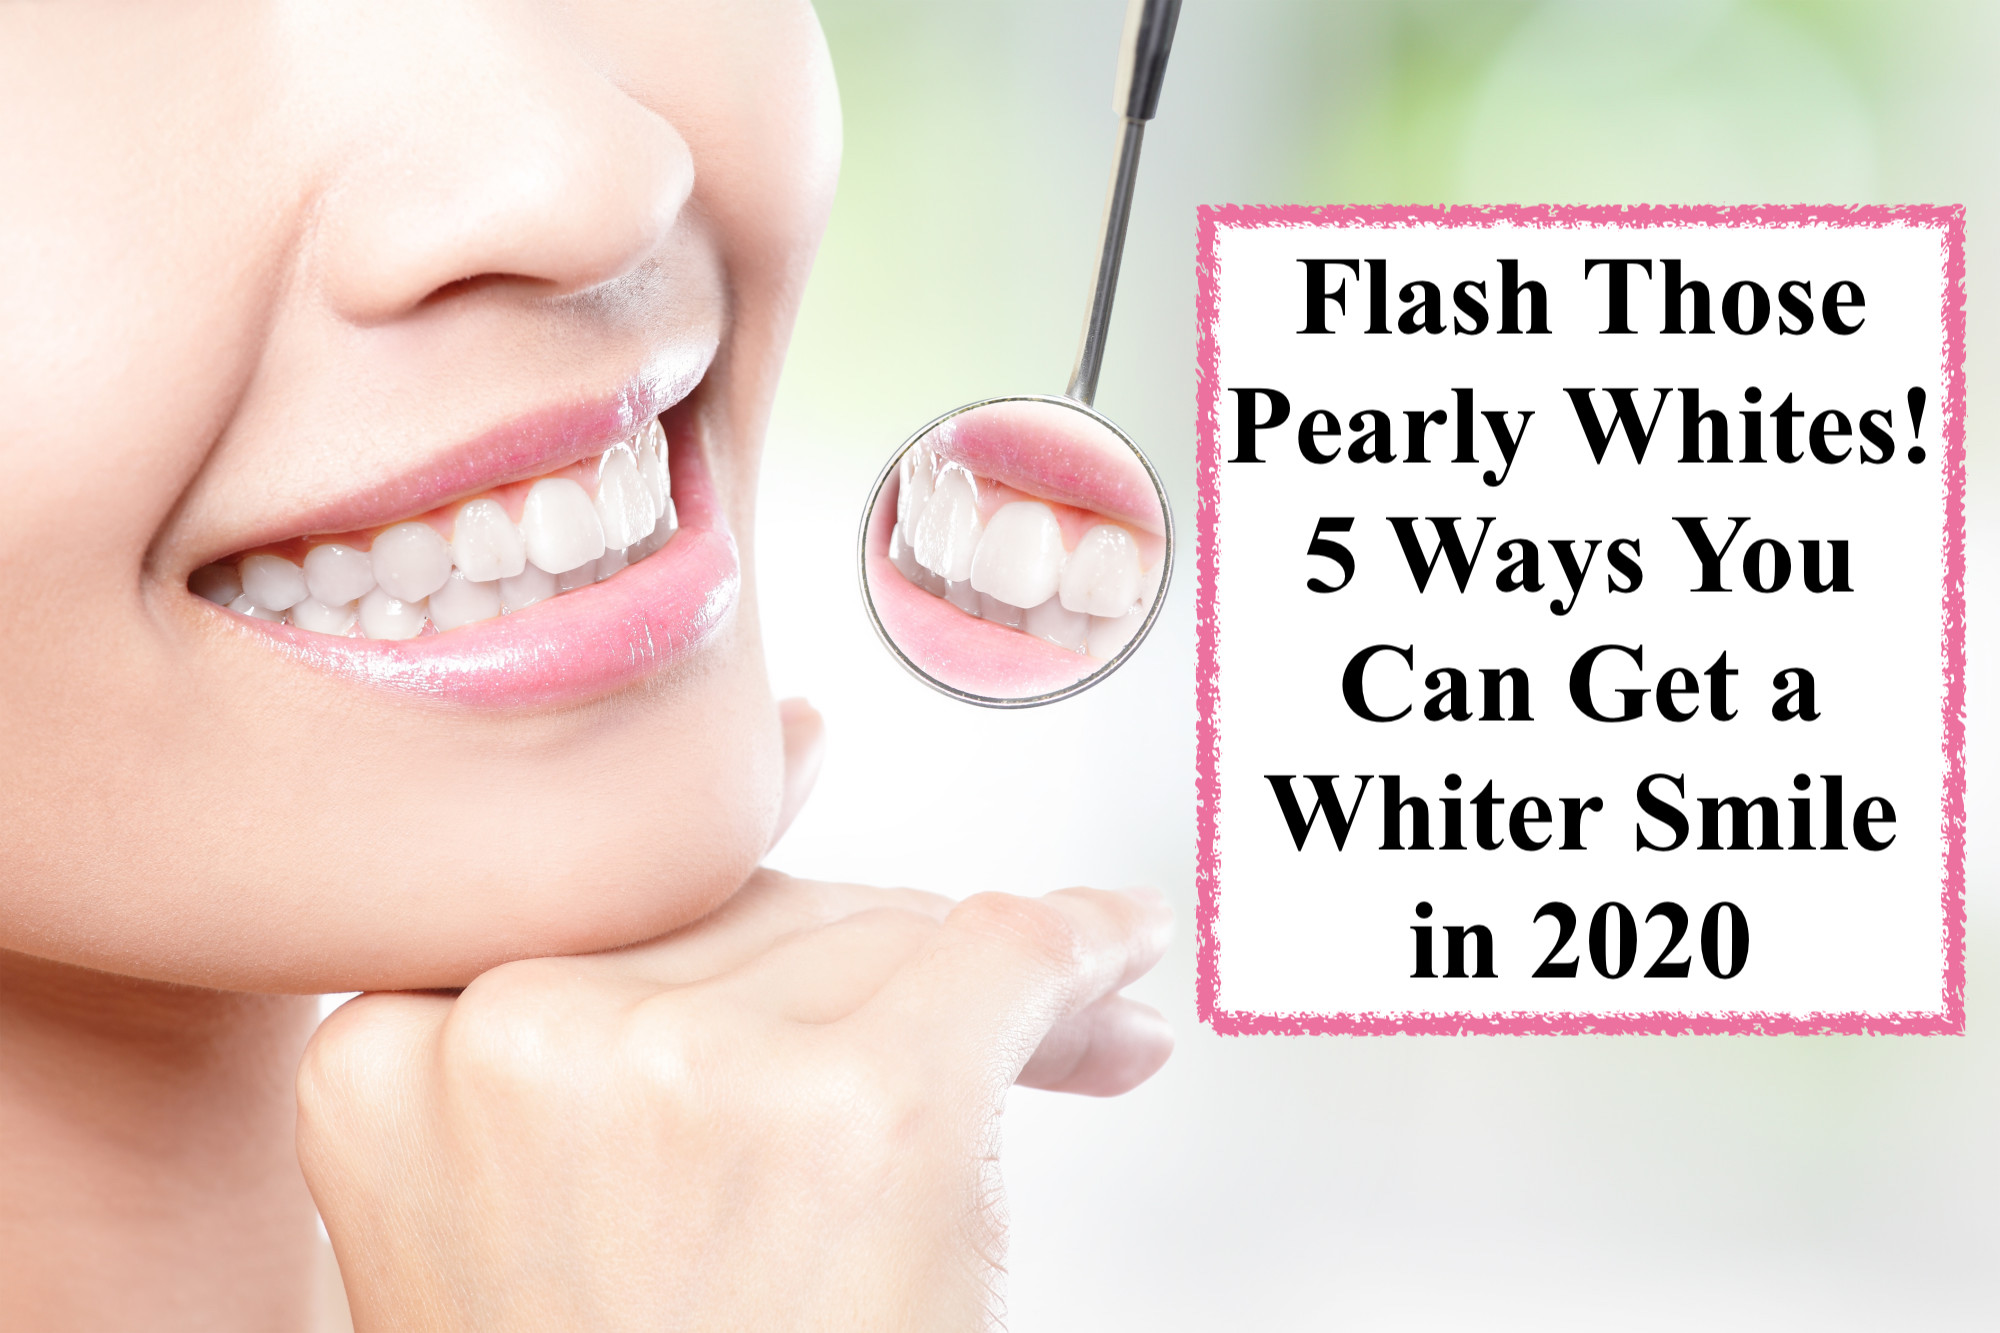 flash those pearly whites!